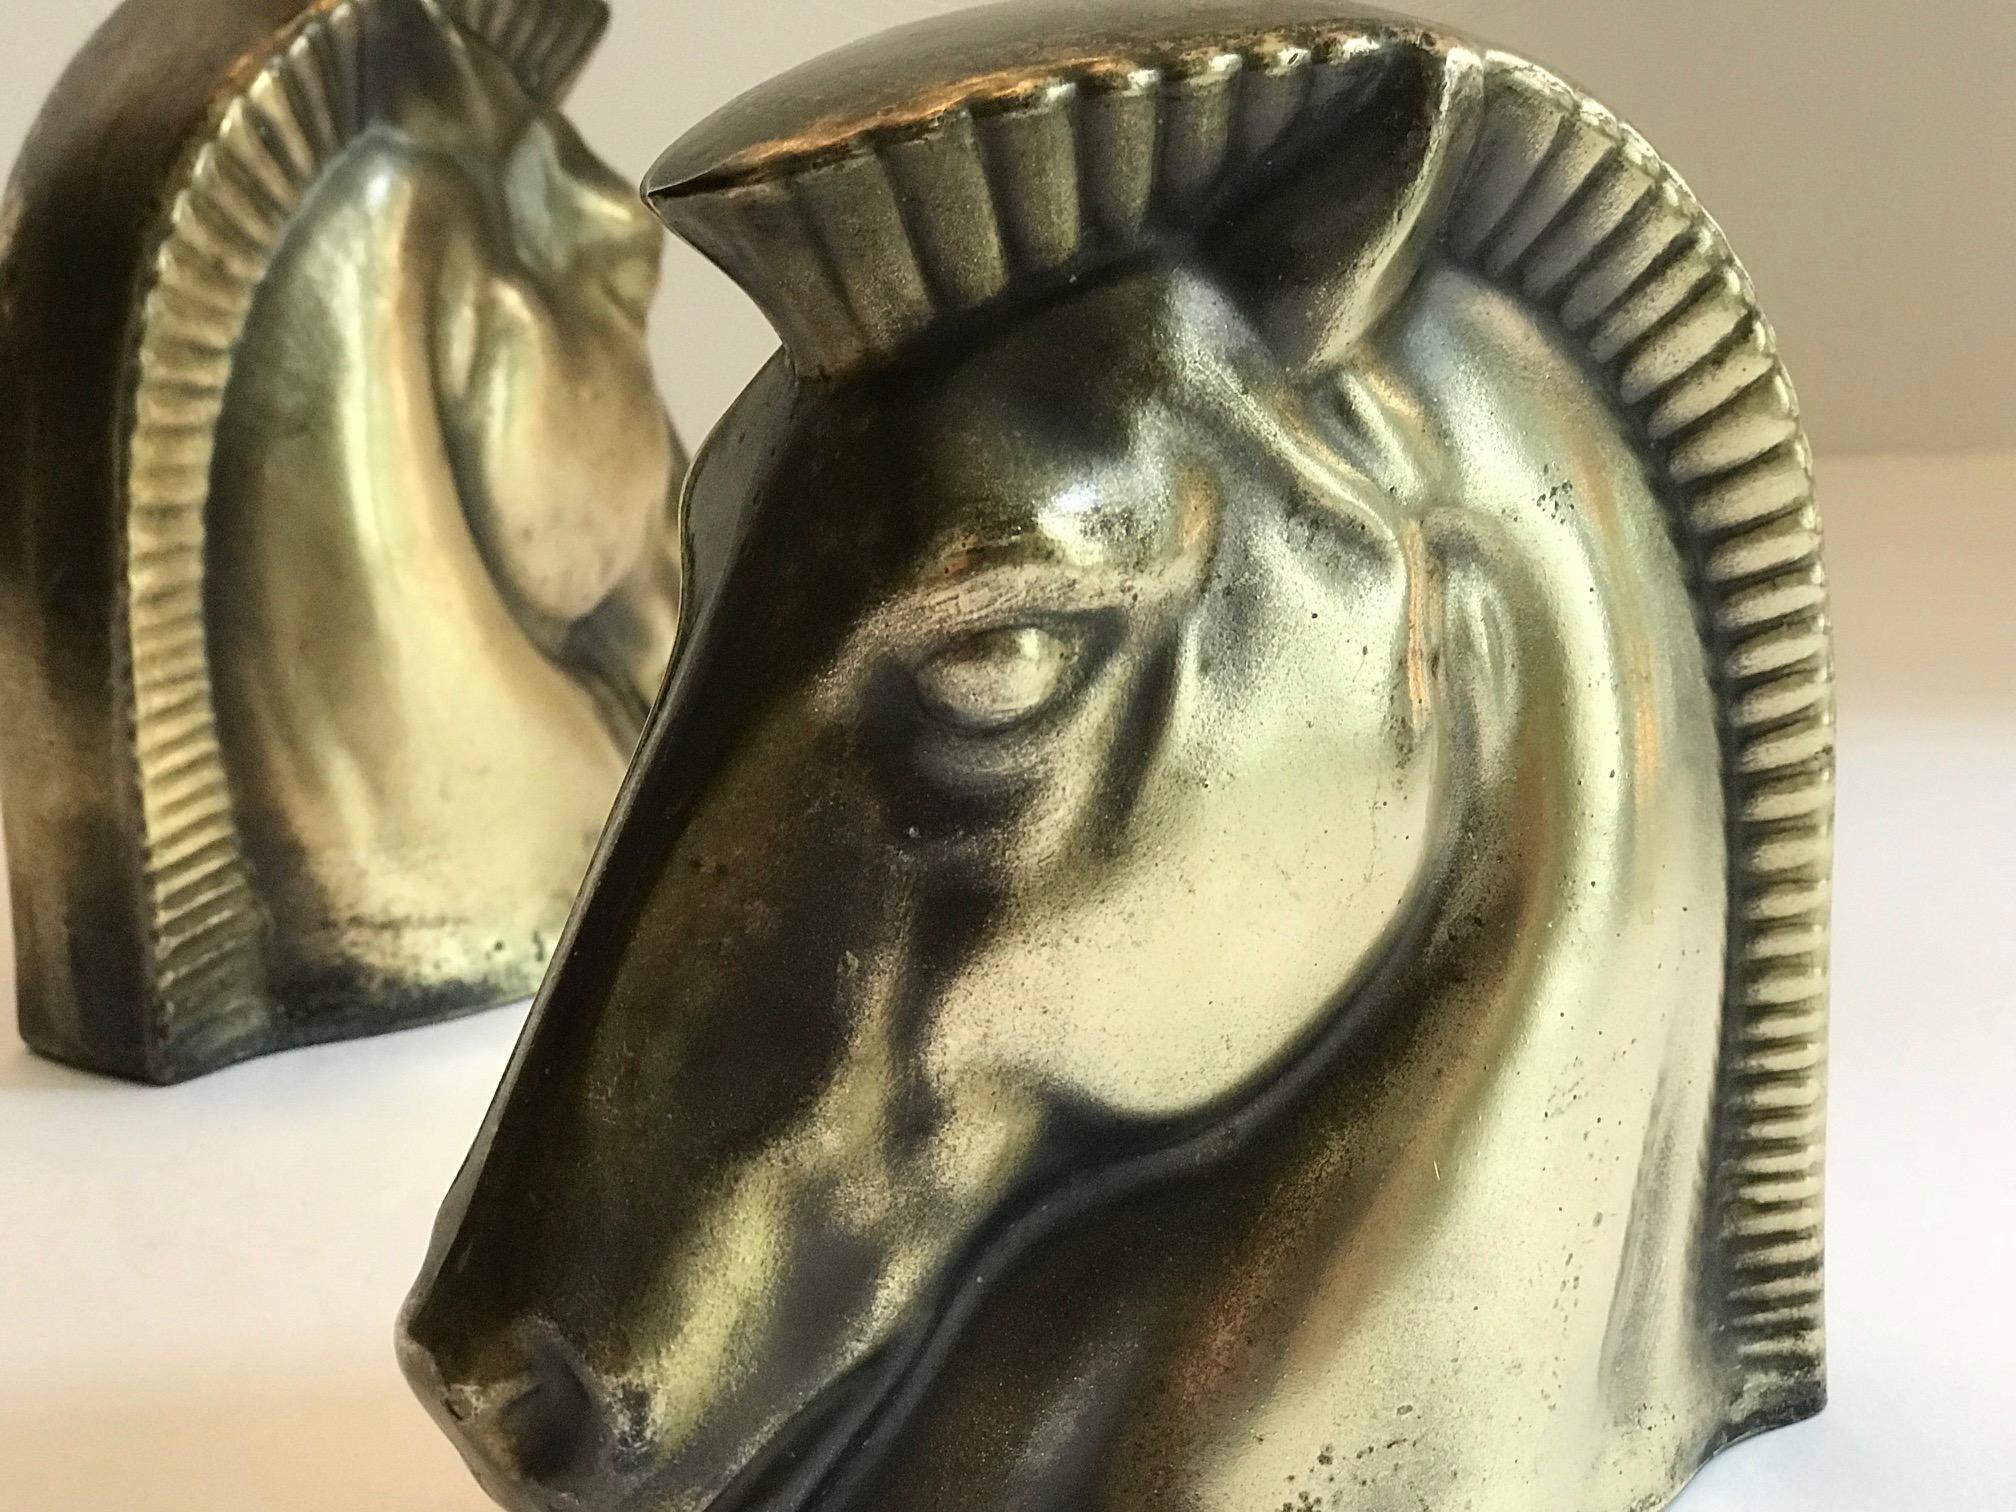 Pair of Art Deco Brass Plated Trojan Horse Bookends by Frankart 12